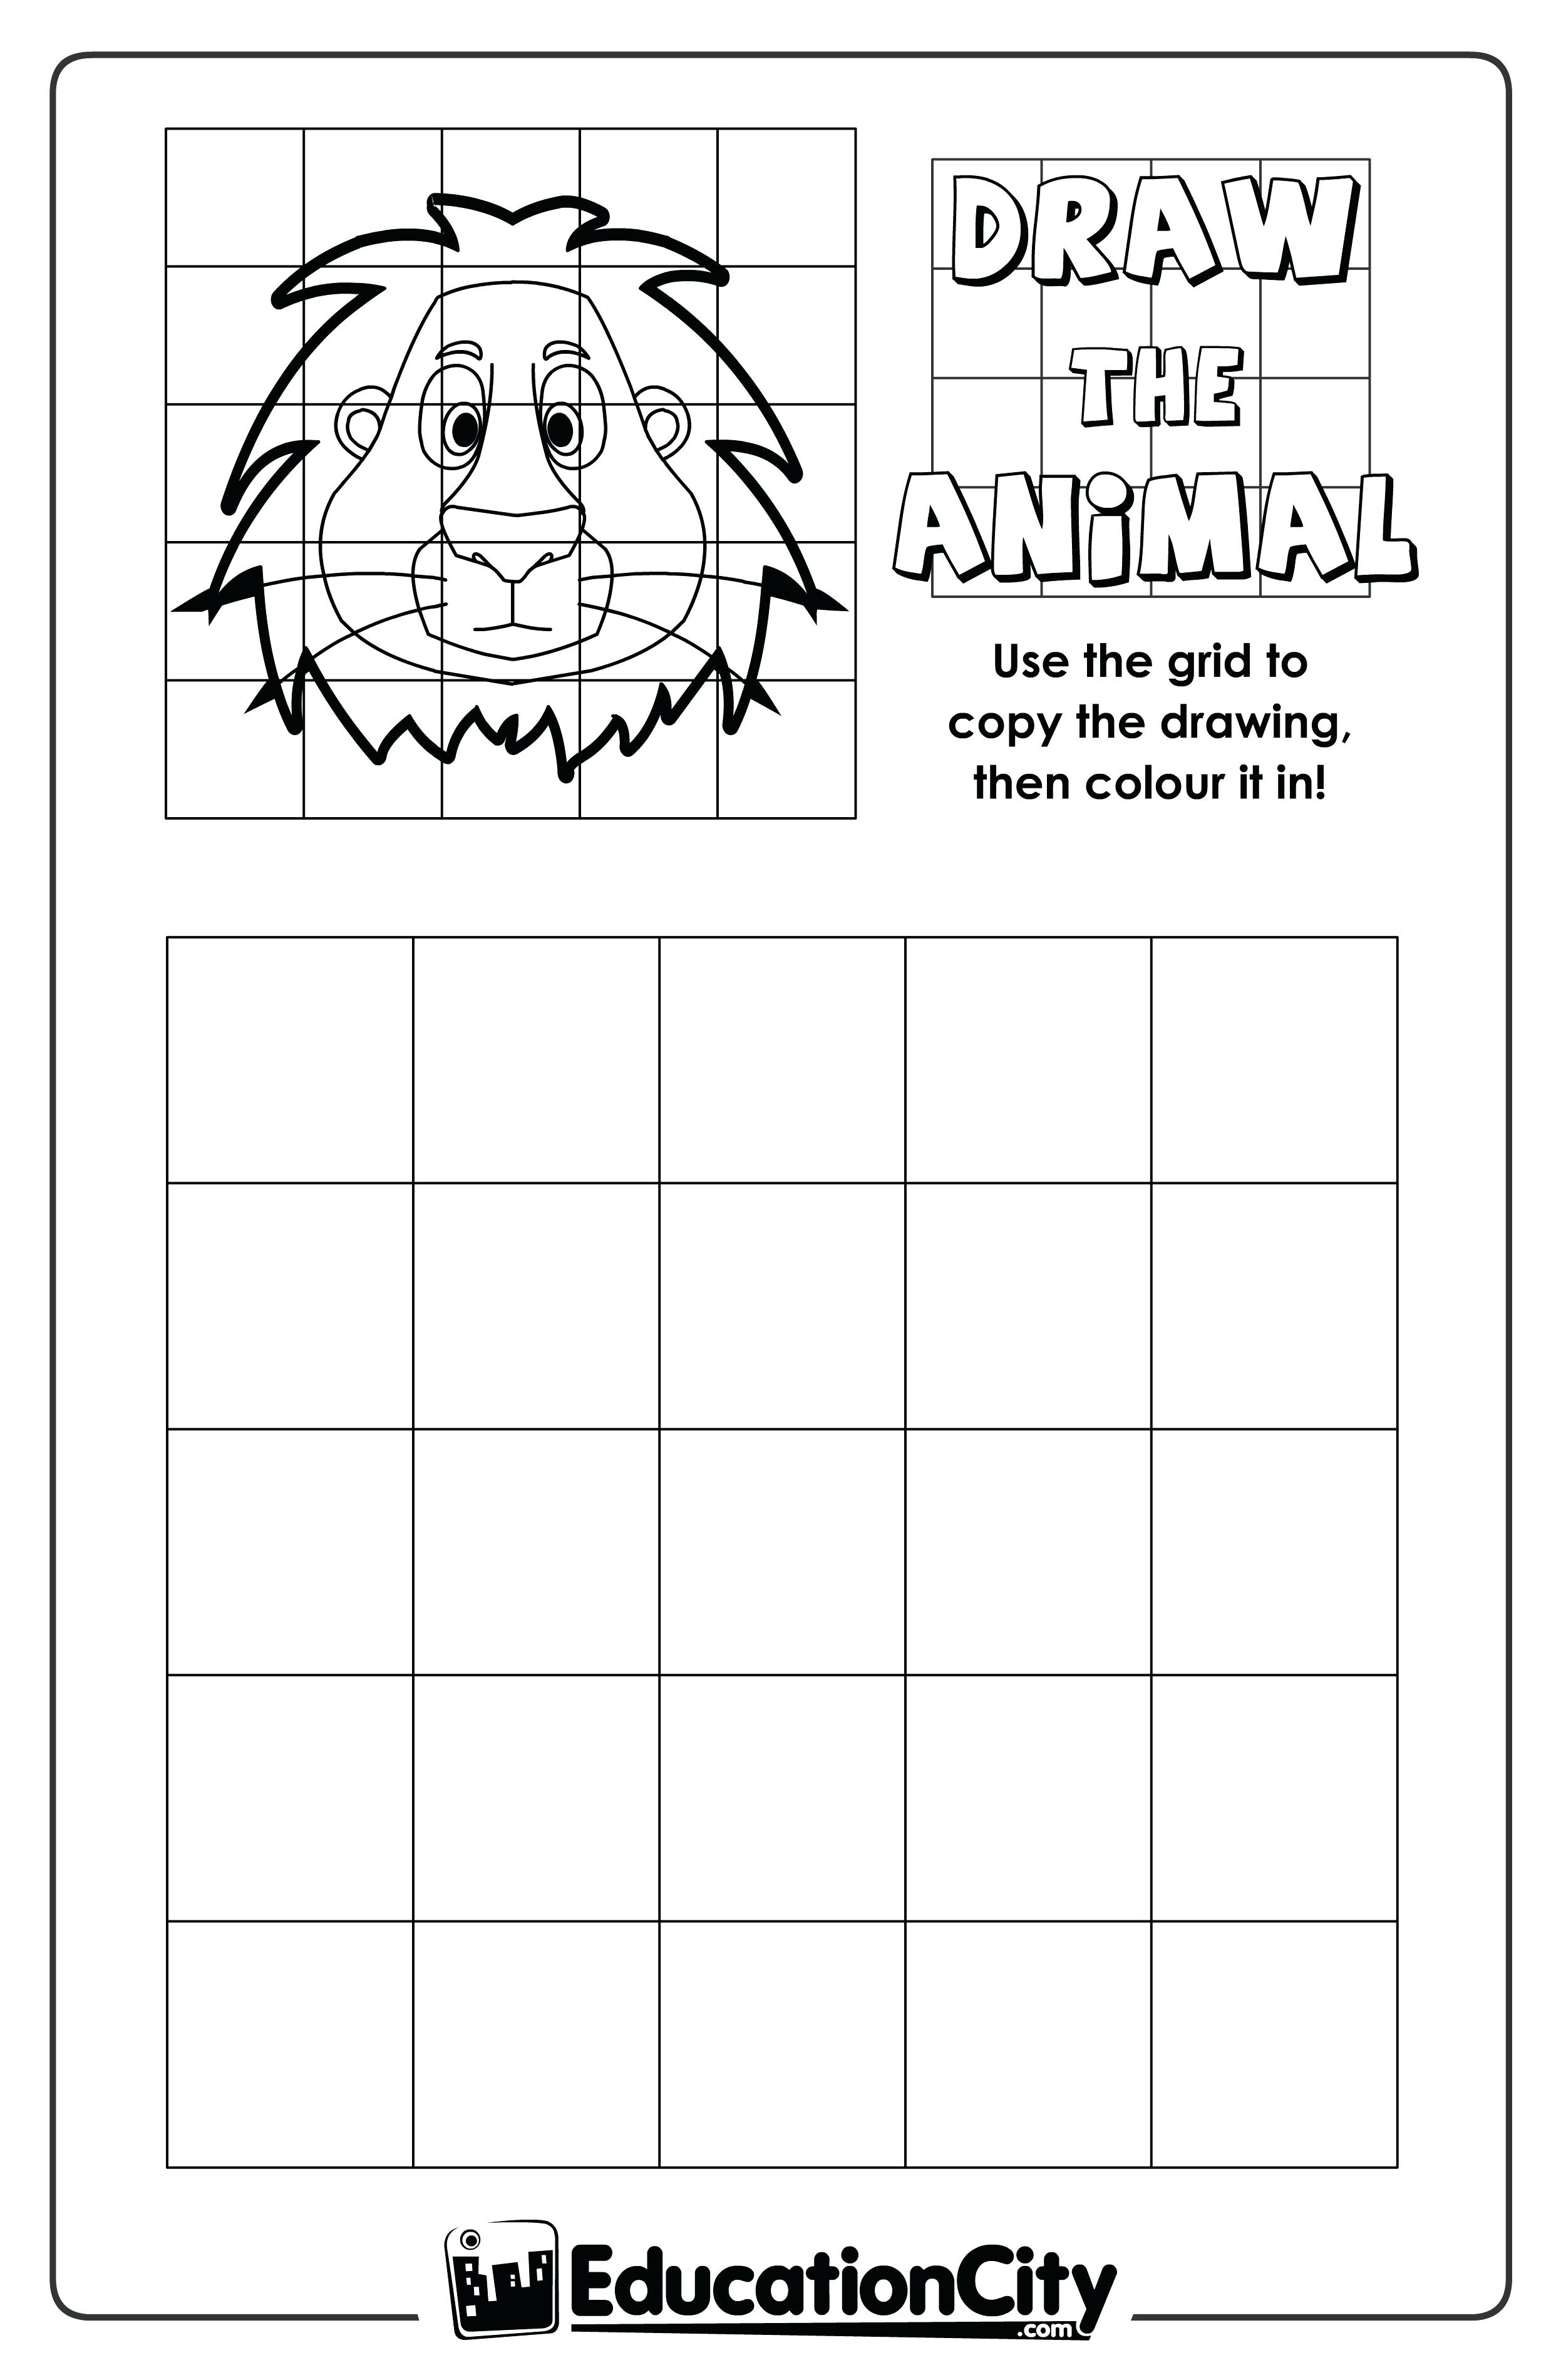 Printable Drawing Sheets at Explore collection of